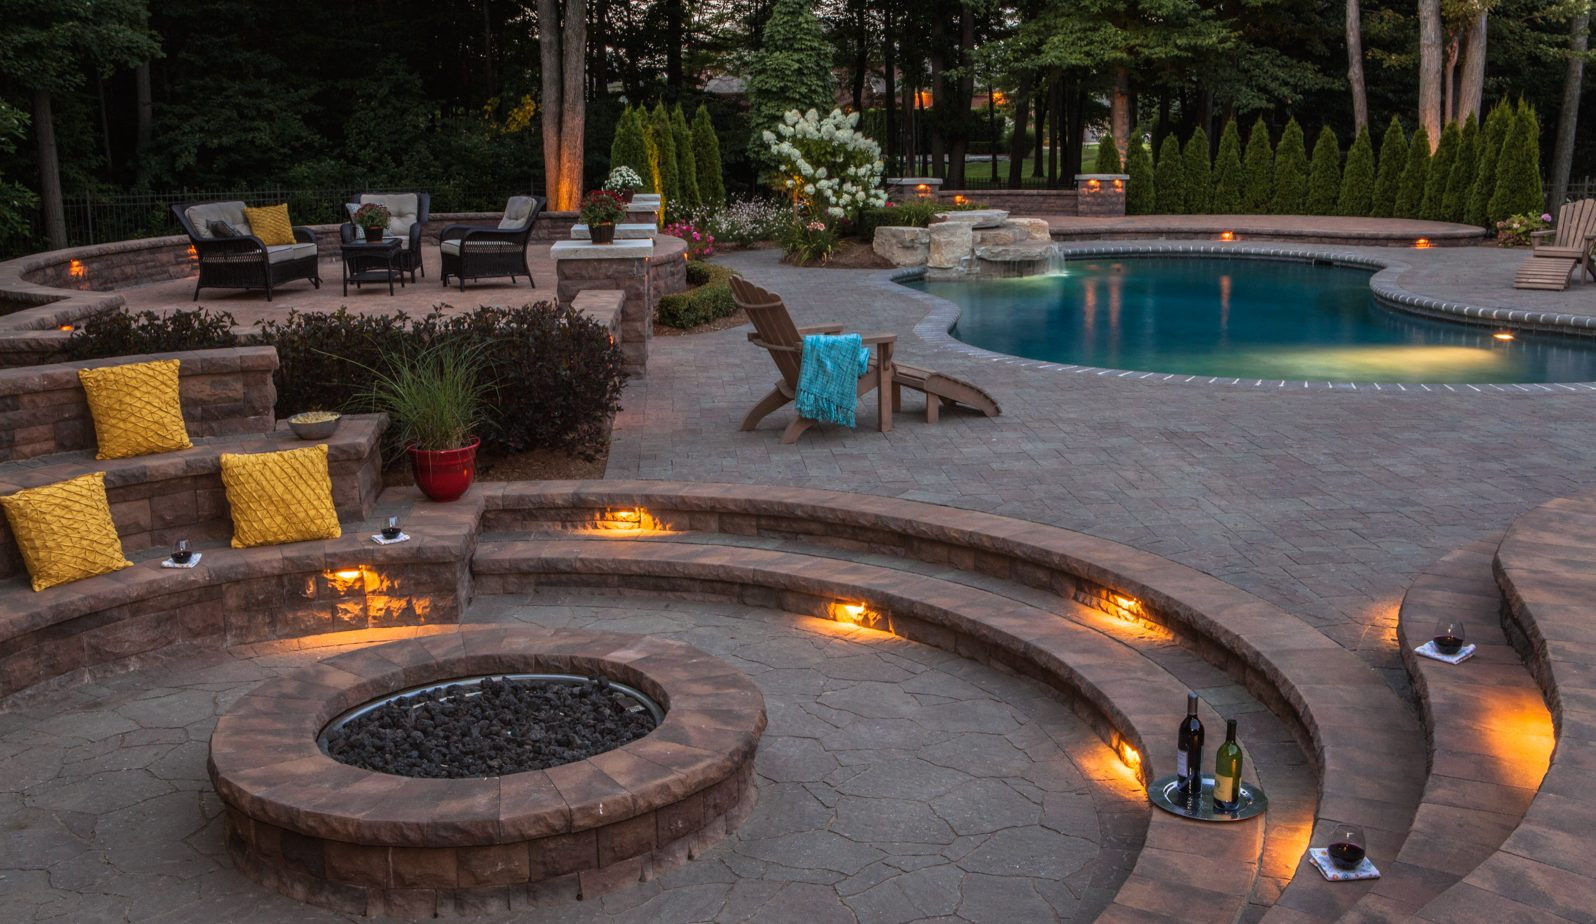 Fire Pits For Patio
 Turn Up the Heat with These Cozy Fire Pit Patio Design